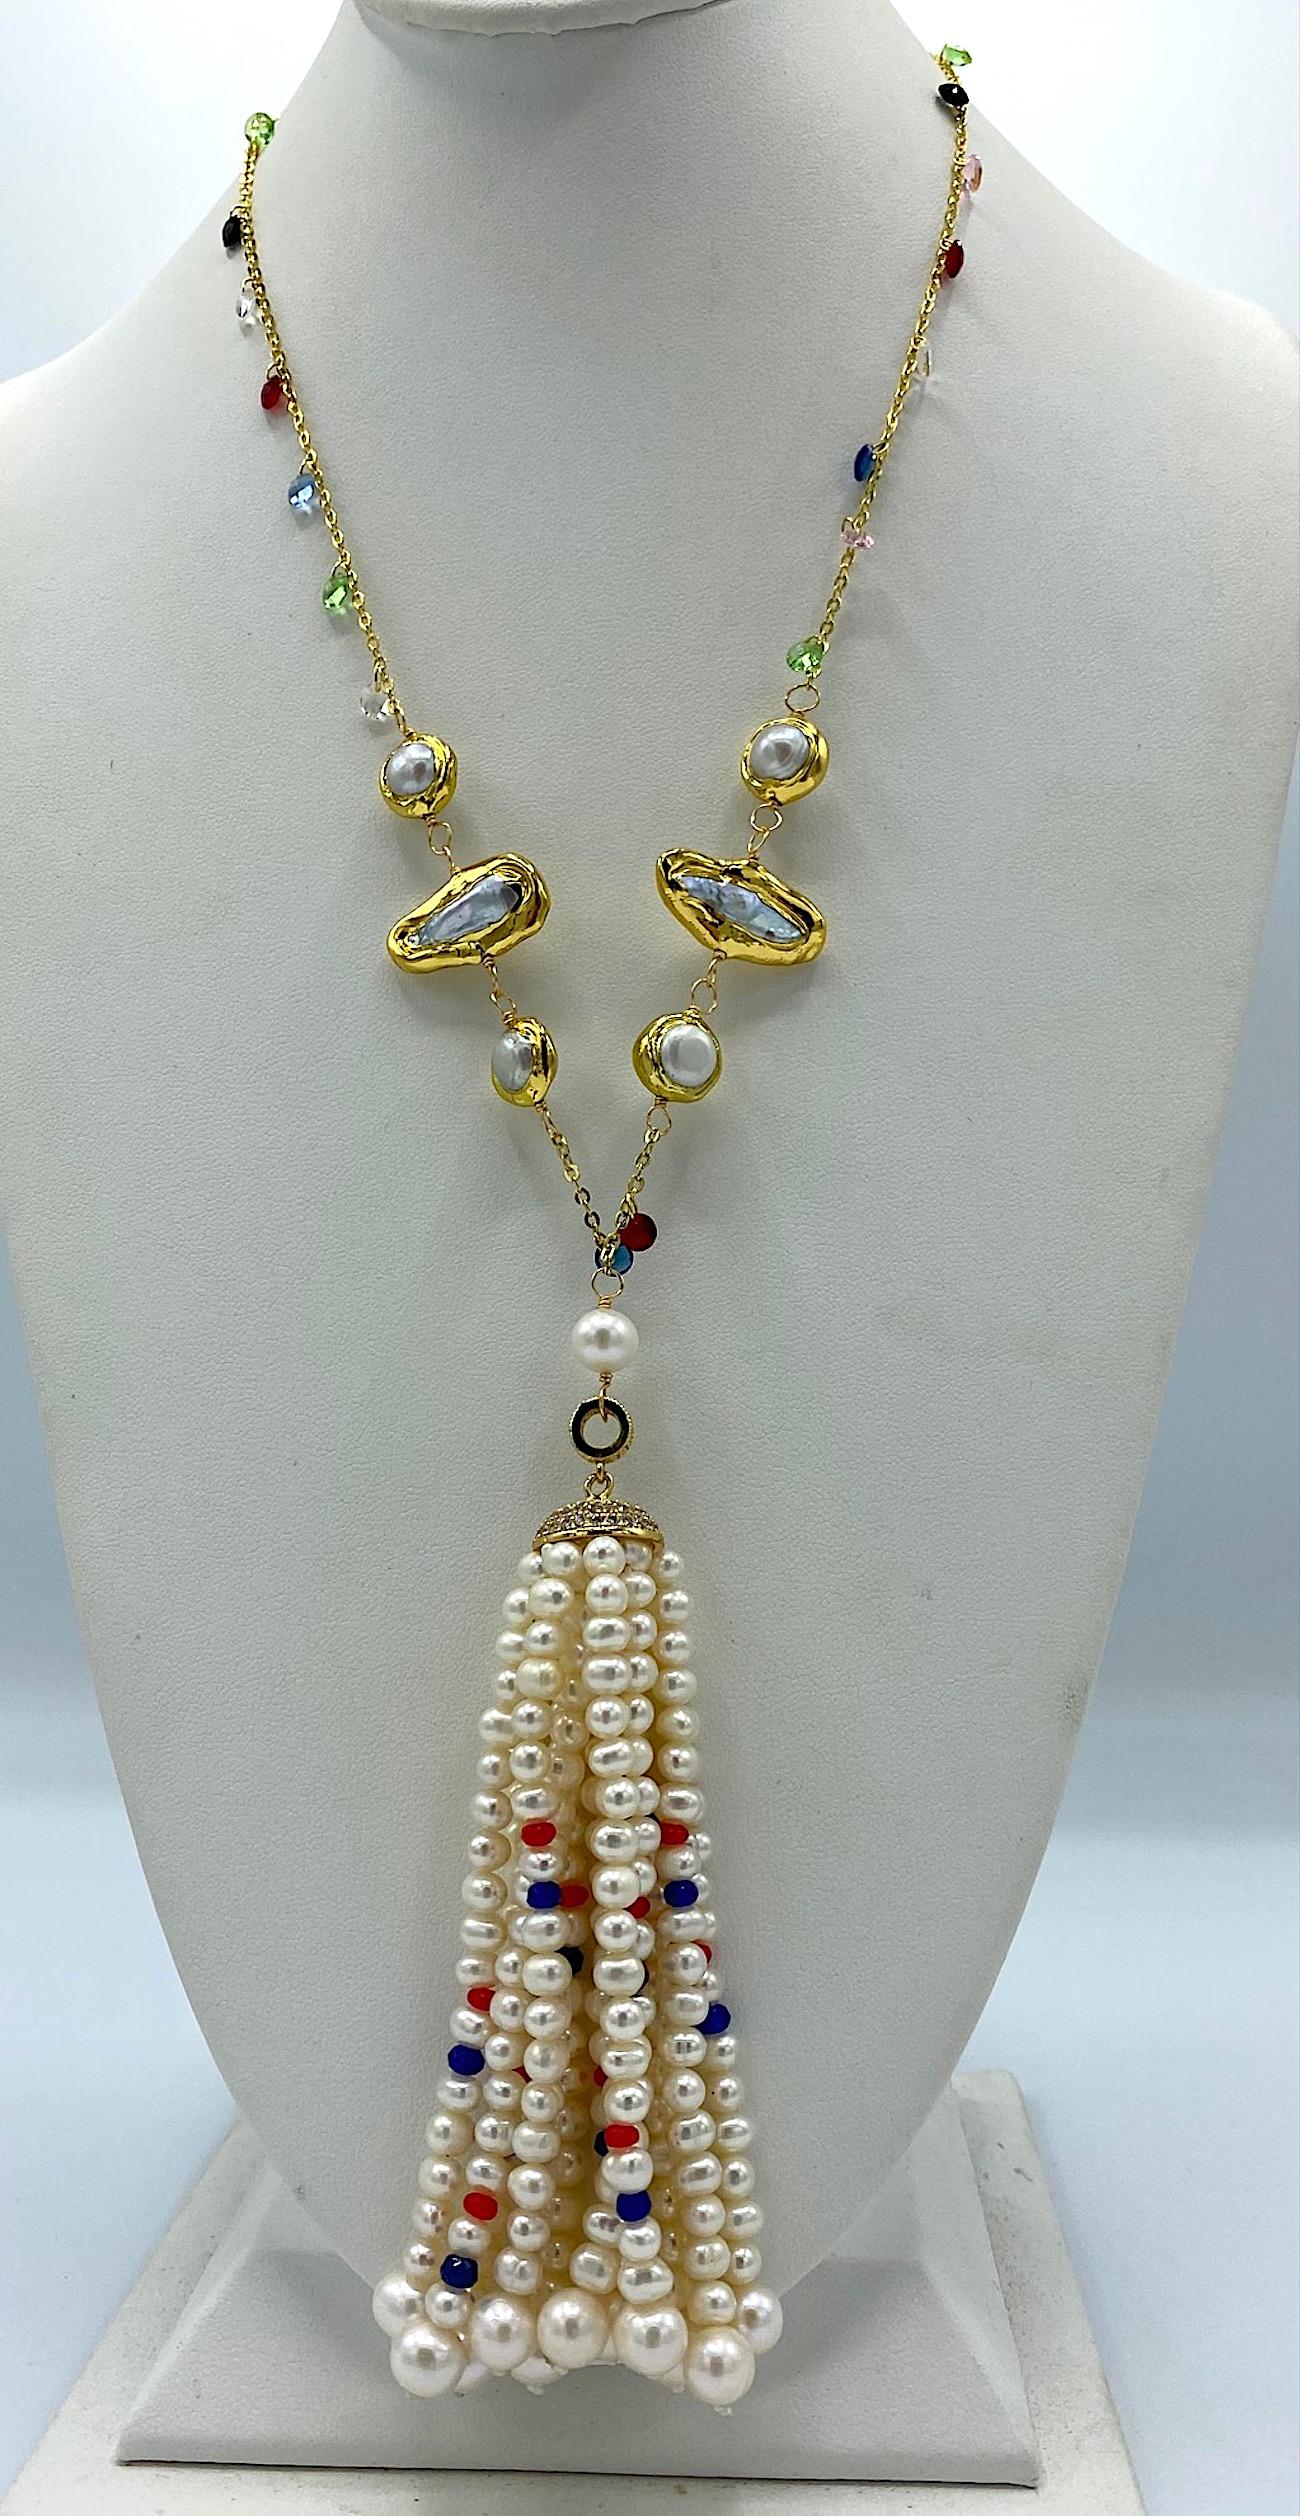 Briolette Cut Natural Pearl with Ruby, Sapphire and Crystal bead Tassel Necklace